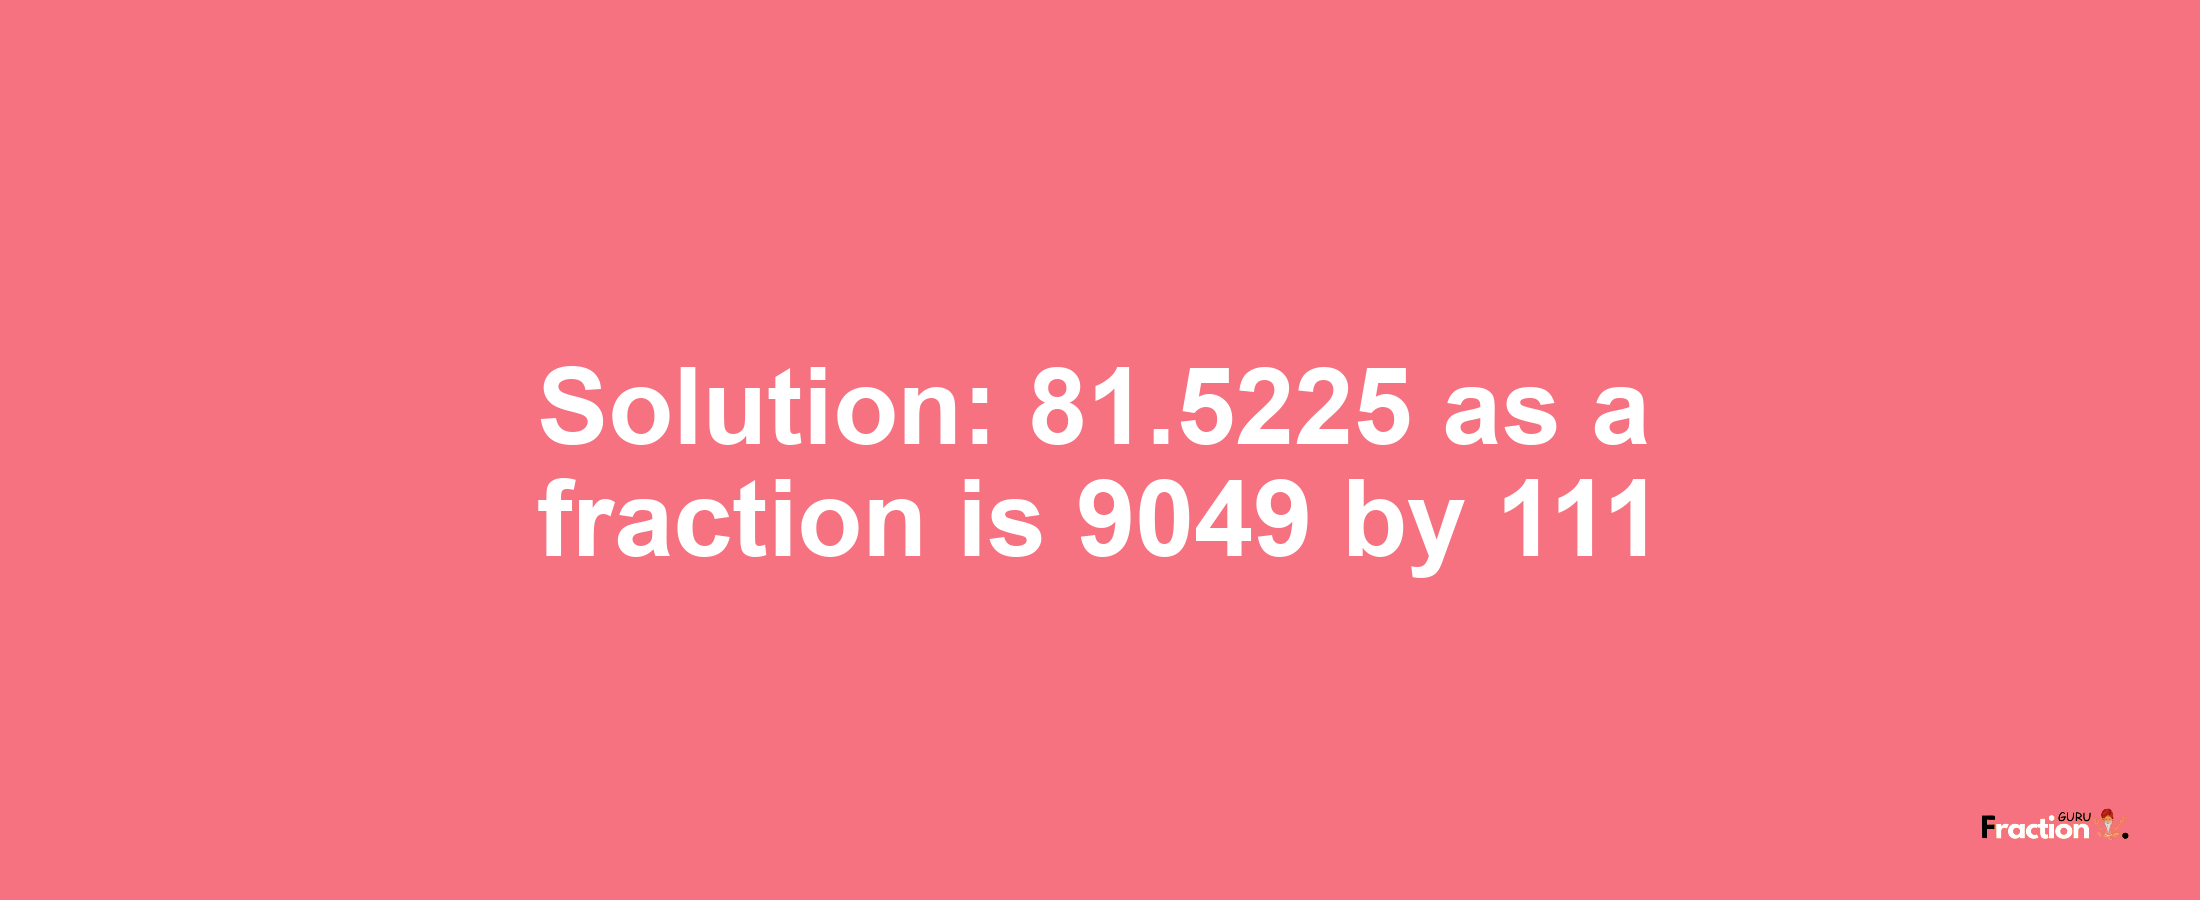 Solution:81.5225 as a fraction is 9049/111